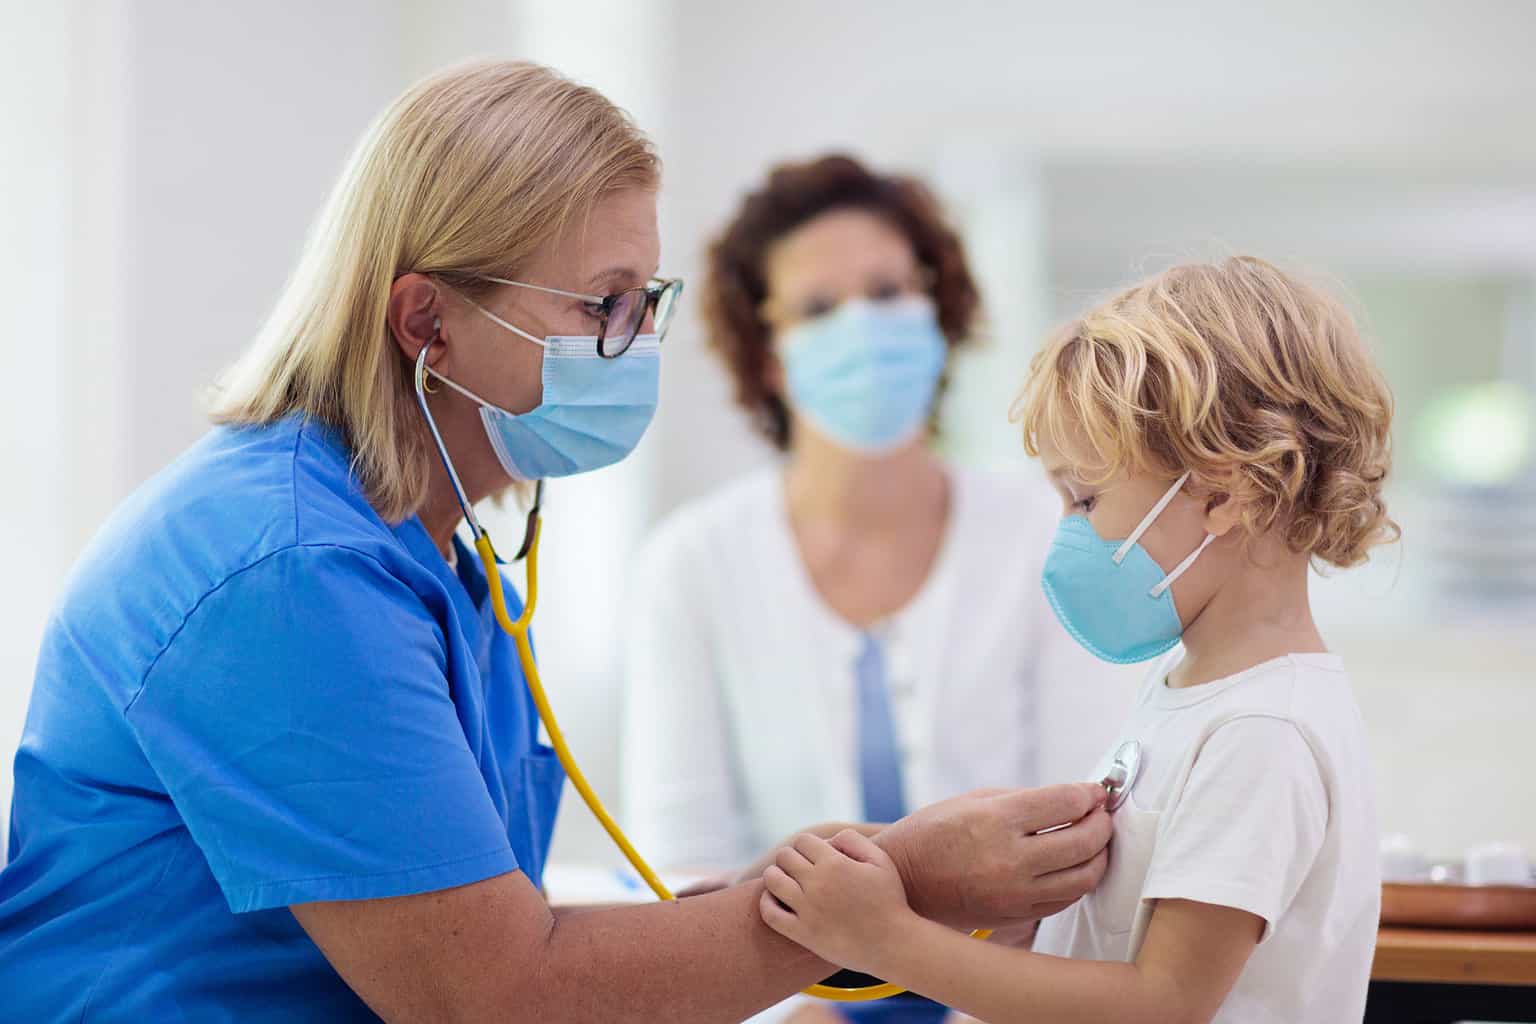 Doctor examining sick child in face mask for rsv virus